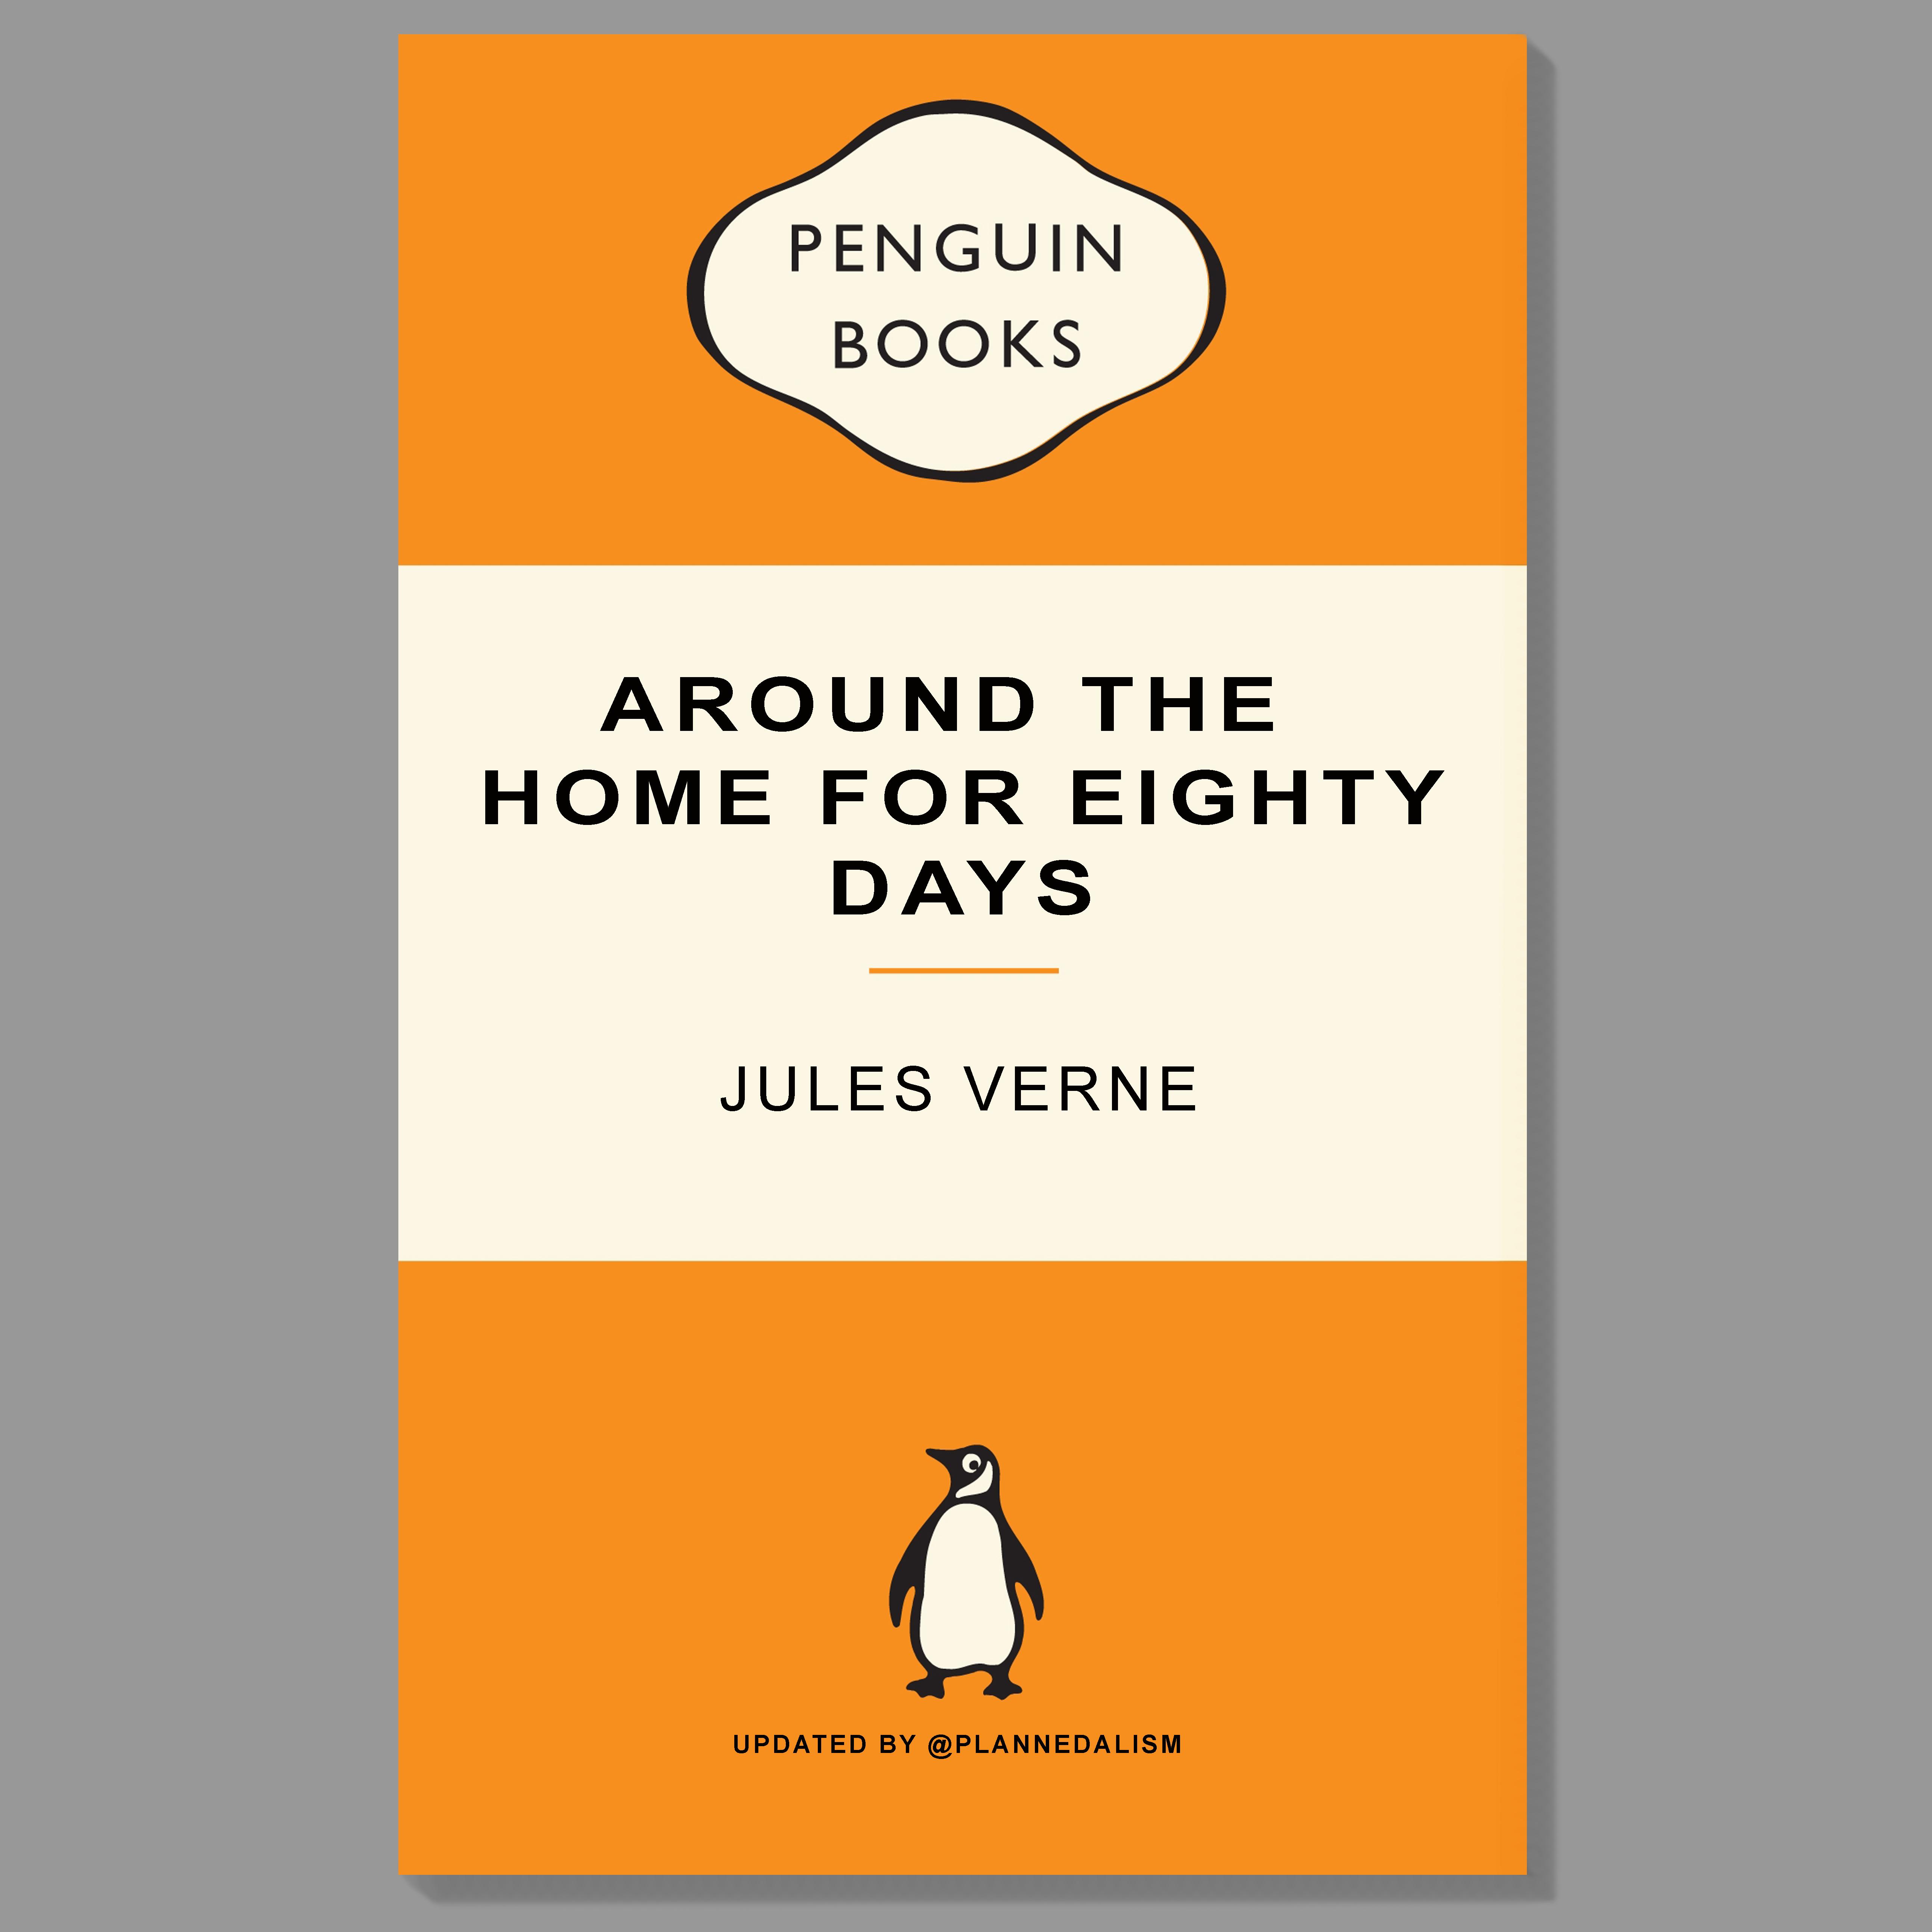 penguin book back covers